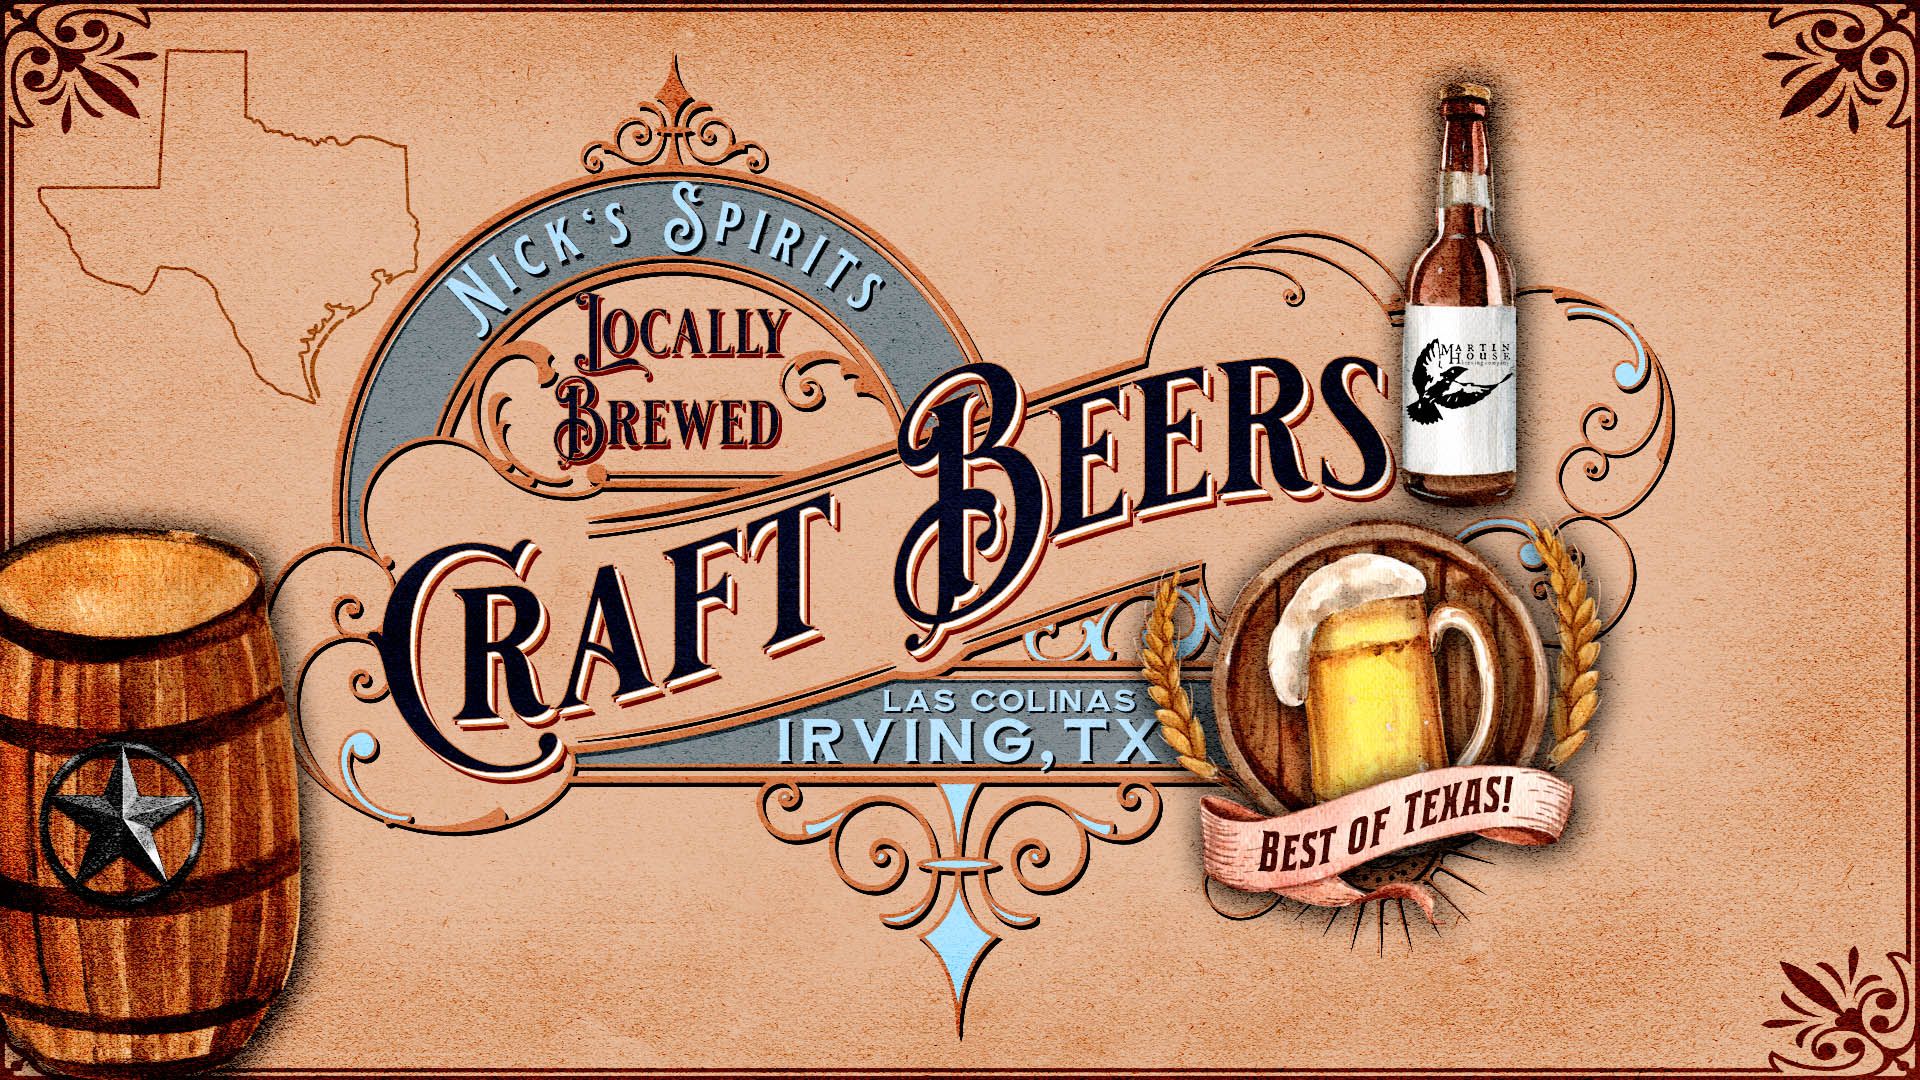 Locally Brewed Craft Beers by Nick's Spirits